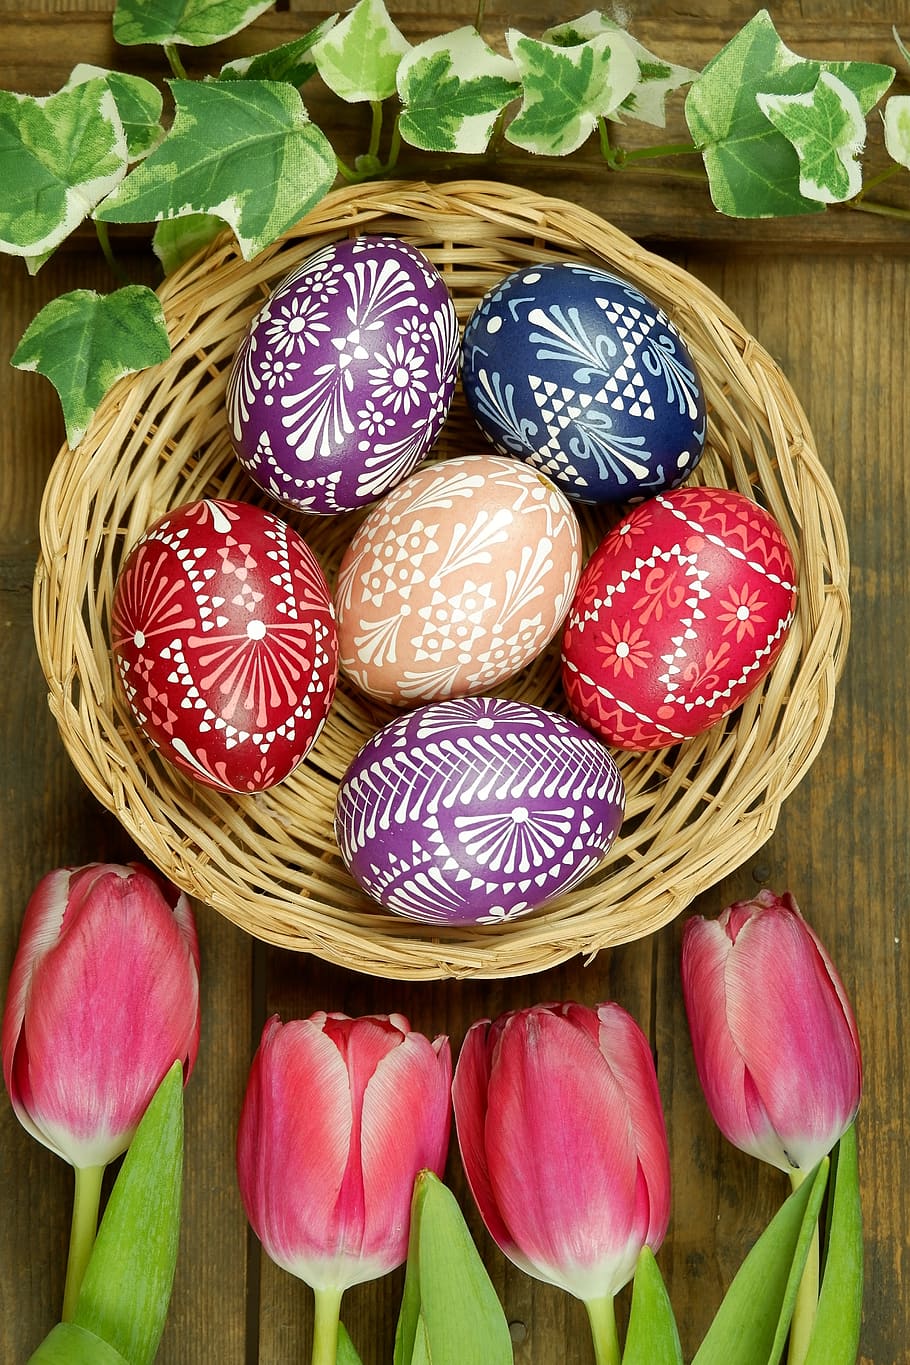 sorbian easter eggs, sorbian easter egg, spring, spring decoration, easter eggs, easter, bossi technology, wax technique, the scratching technique, etching